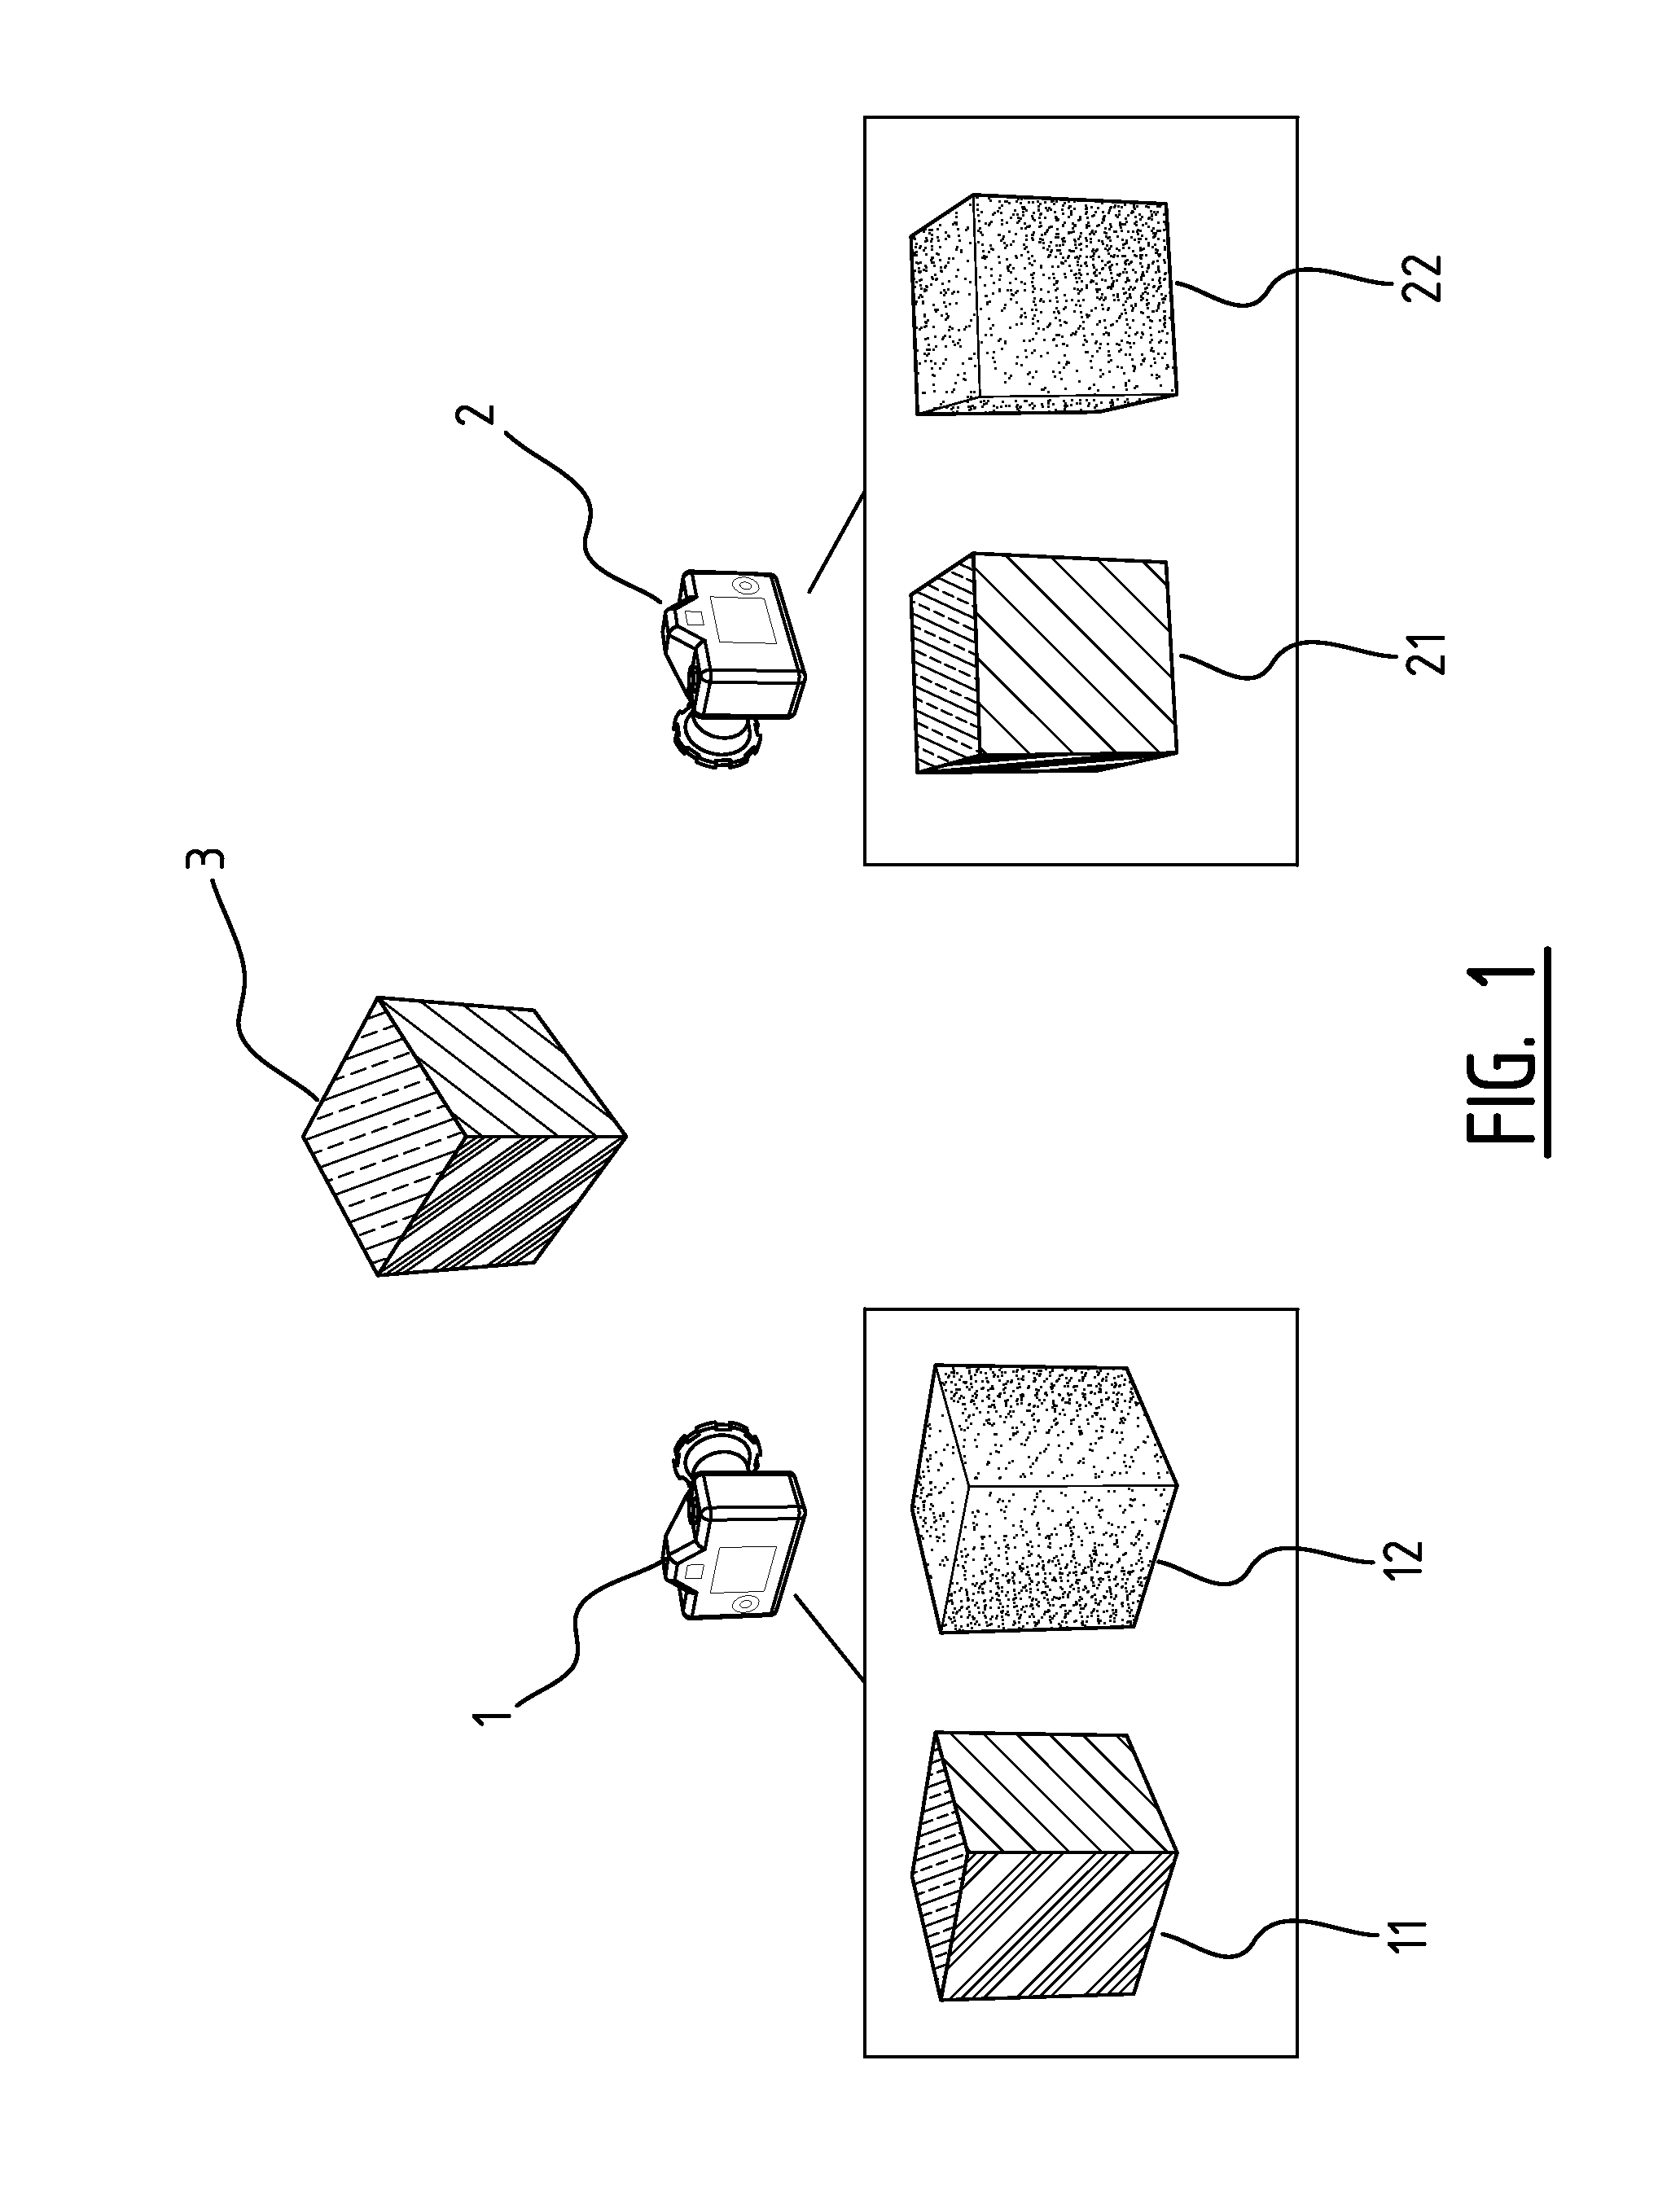 Method for determining the relative position of a first and a second imaging device and devices therefore